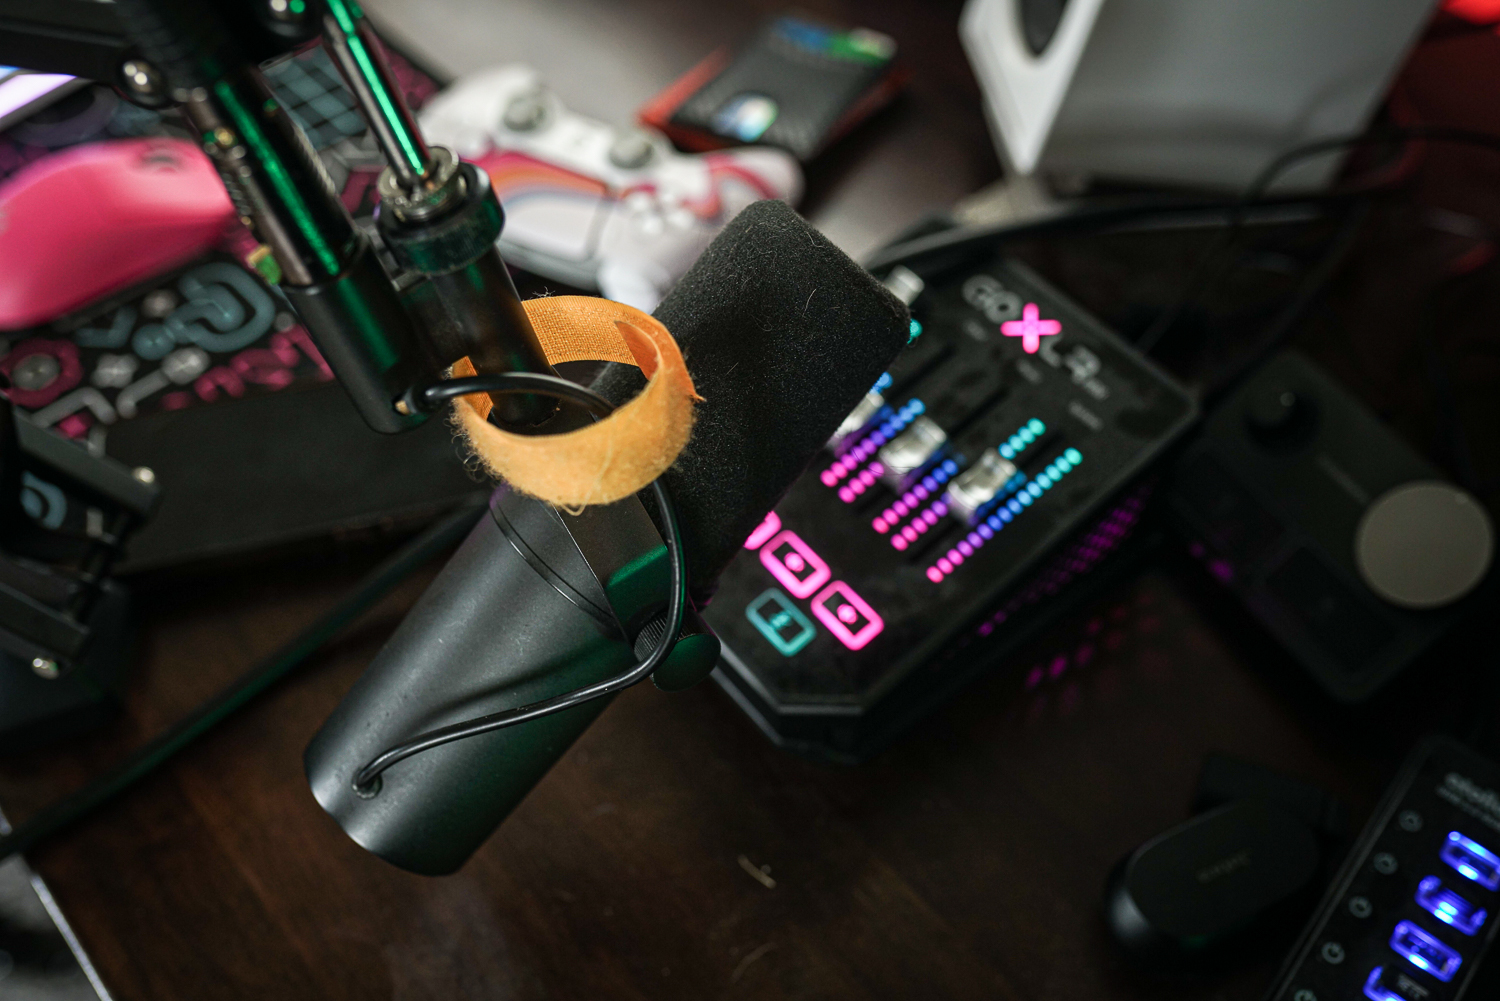 Steelseries' new mic is better than my $ setup   Digital Trends